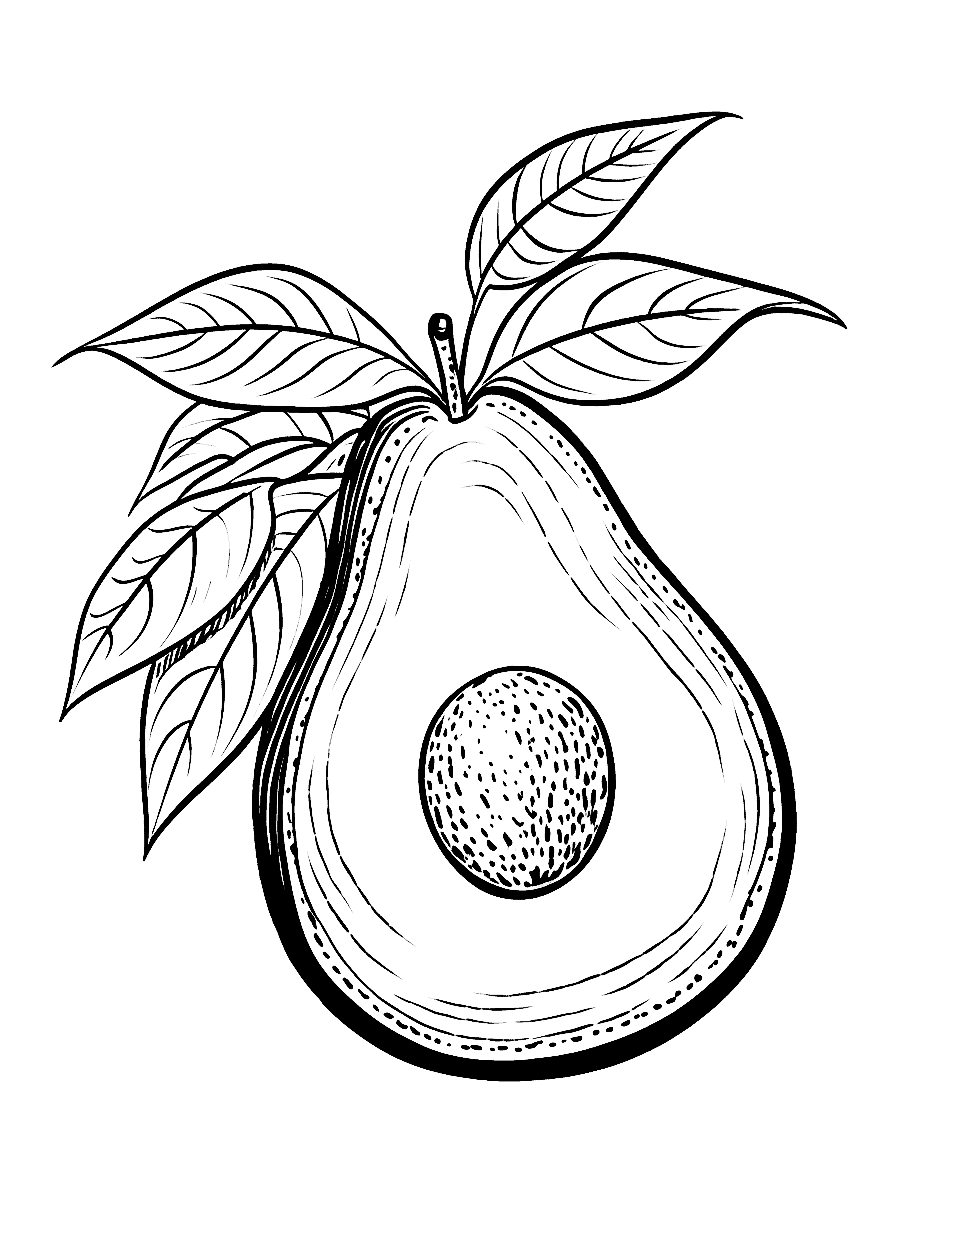 Avocado Awe Fruit Coloring Page - An avocado half with the seed showing, surrounded by leaves.